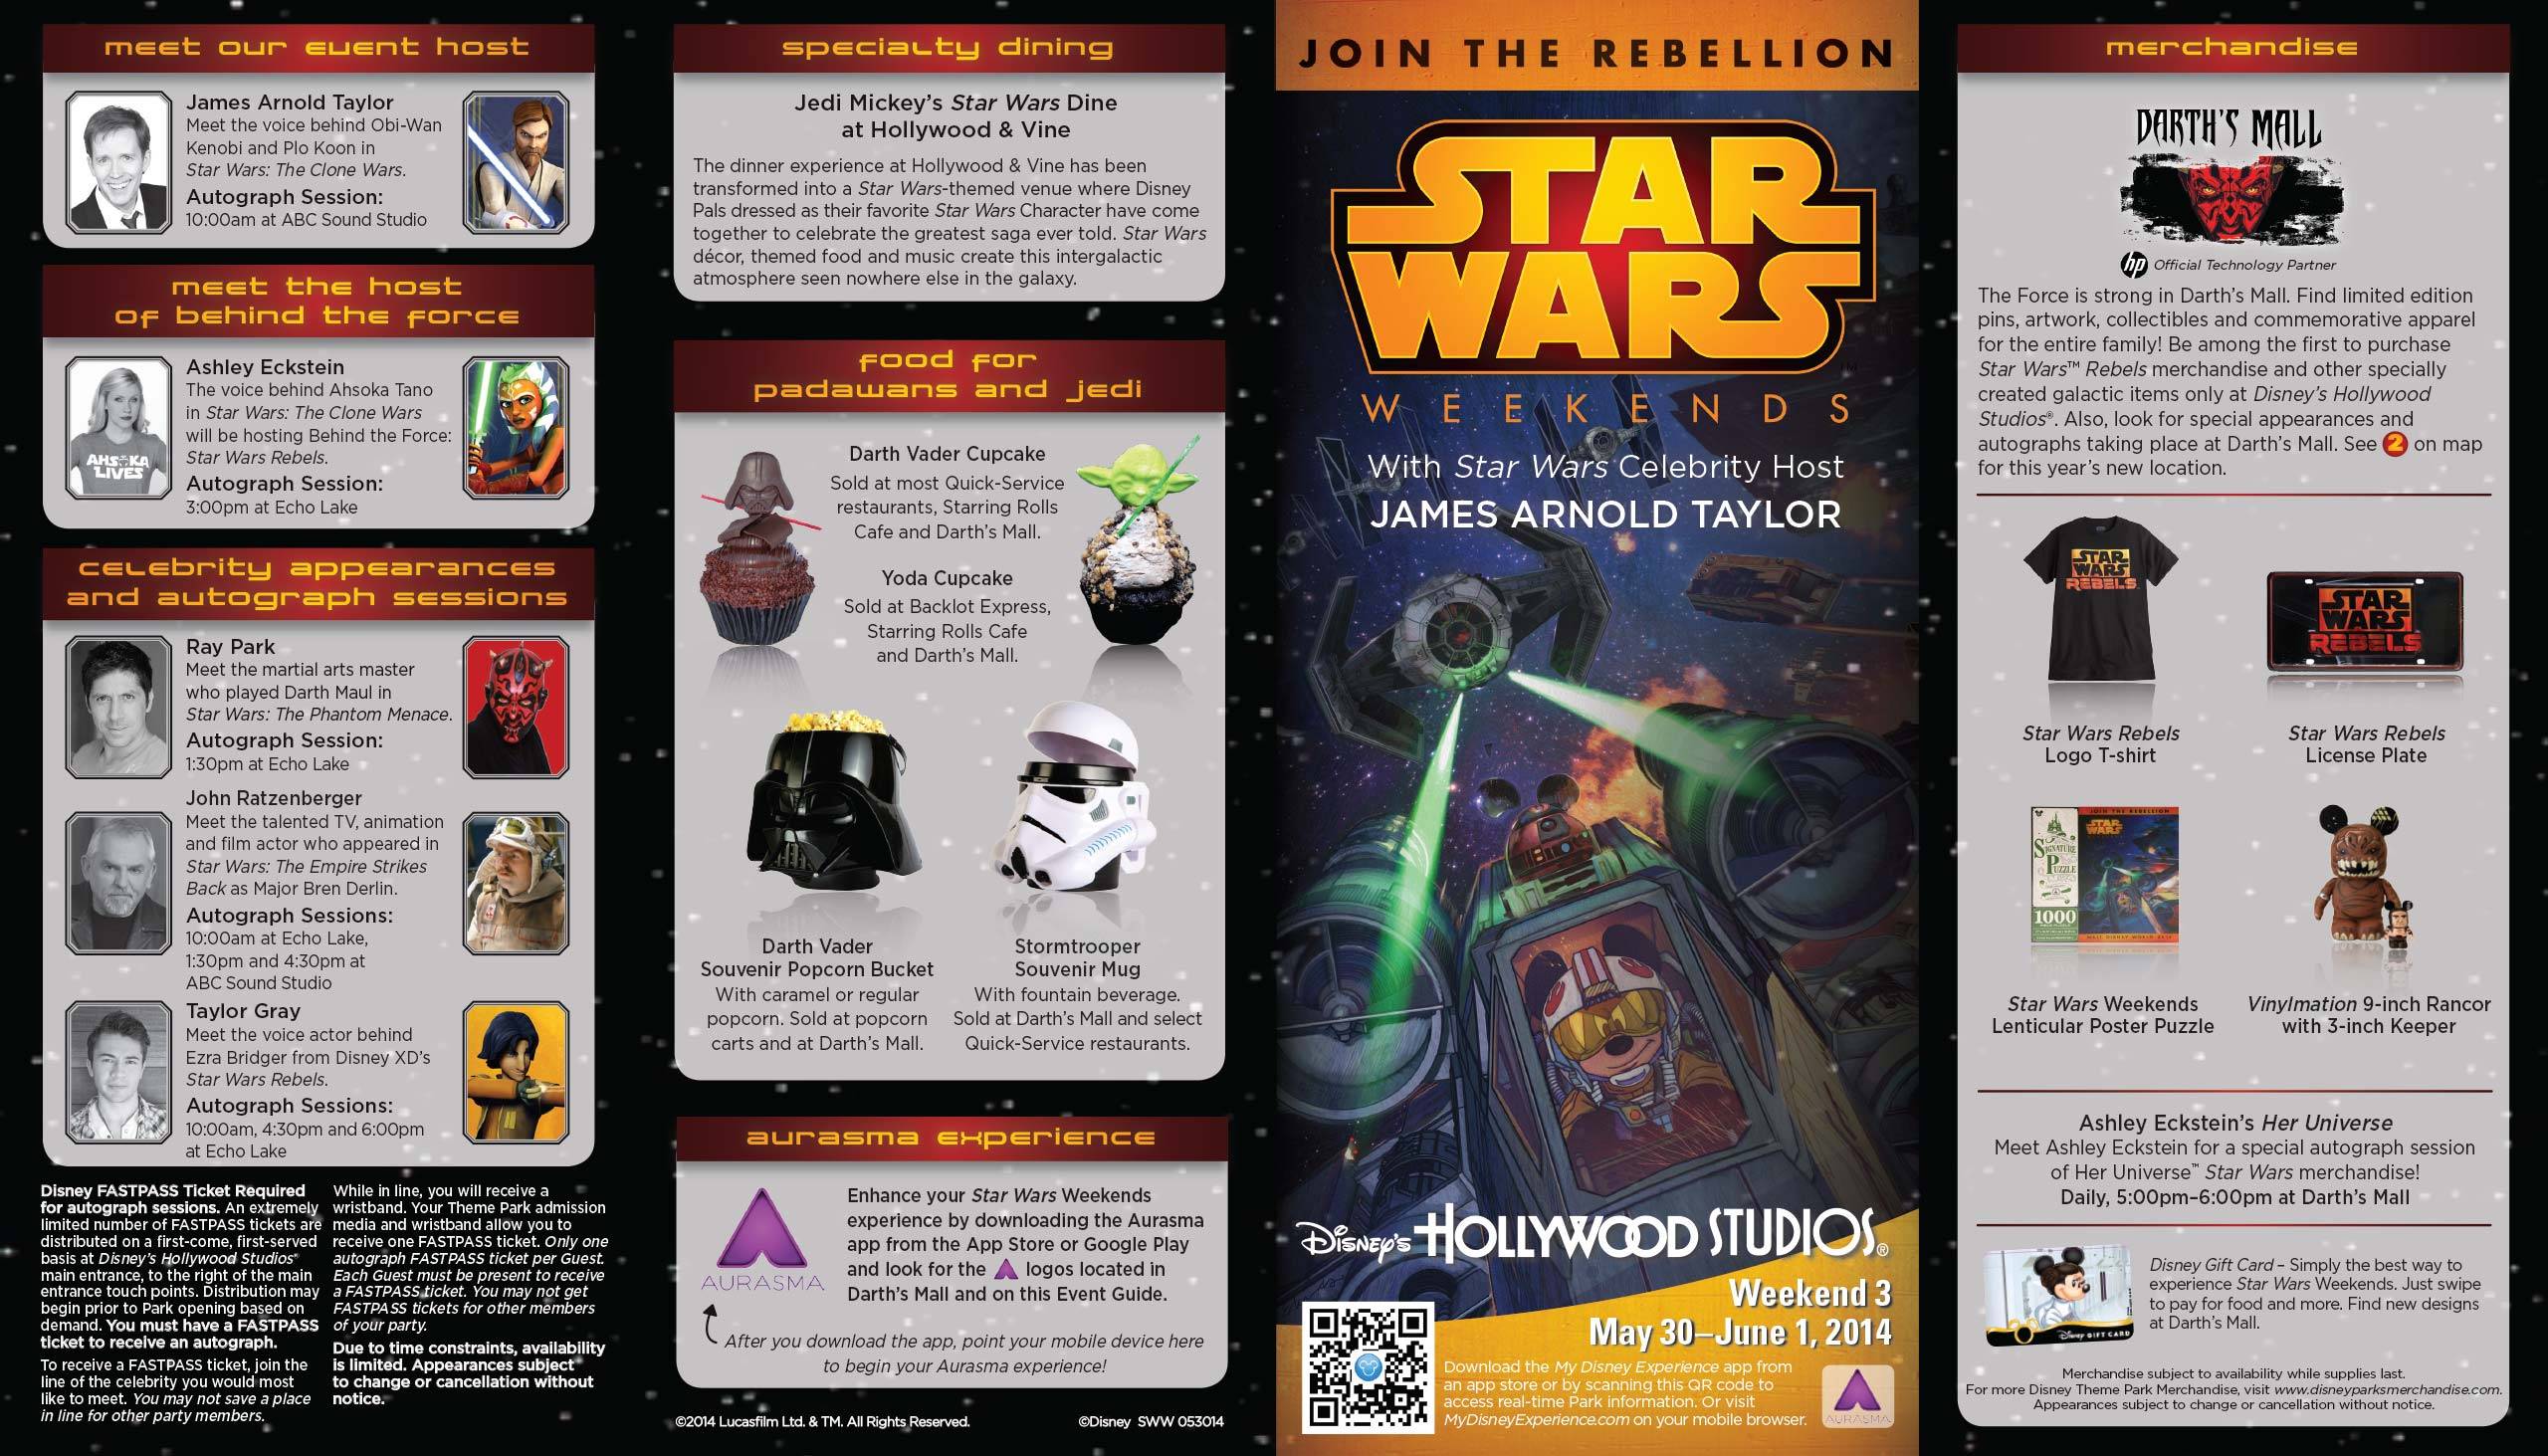 PHOTOS - Star Wars Weekends guide map for Weekend 3